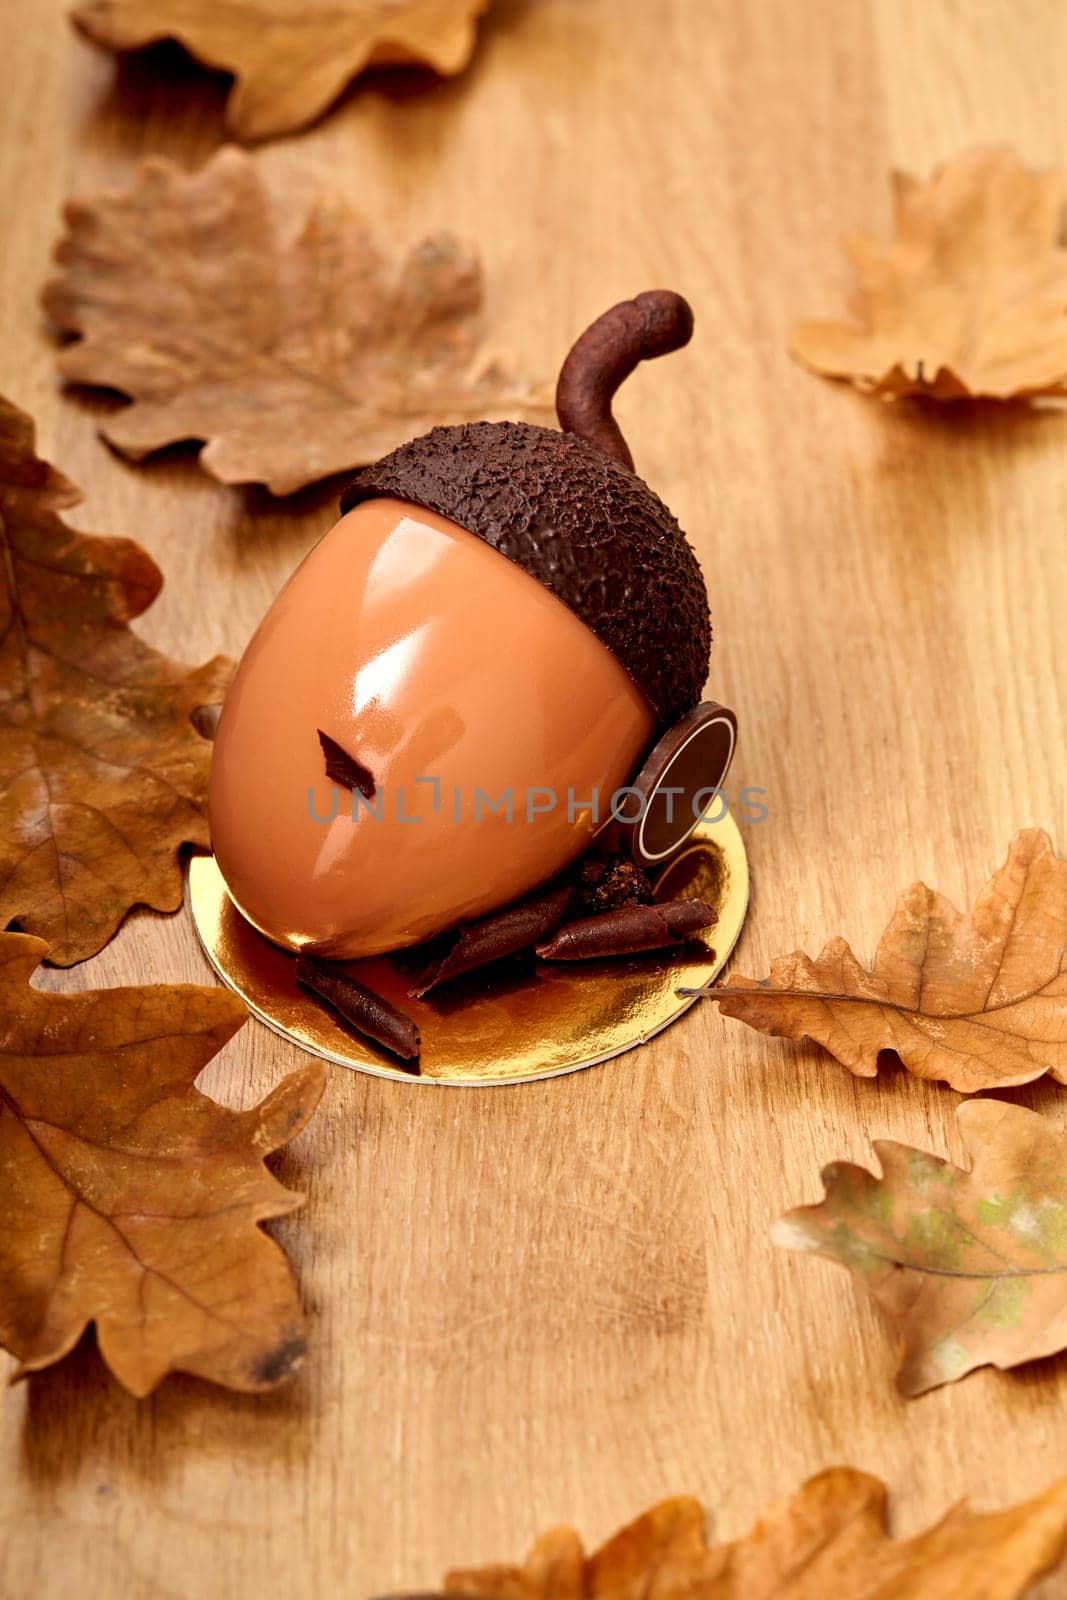 Acorn shaped cake in glossy hazelnut praline ganache and dark chocolate cap and stem, served on golden cardboard on wooden table surrounded by dried oak leaves. Bounties of nature in designer desserts